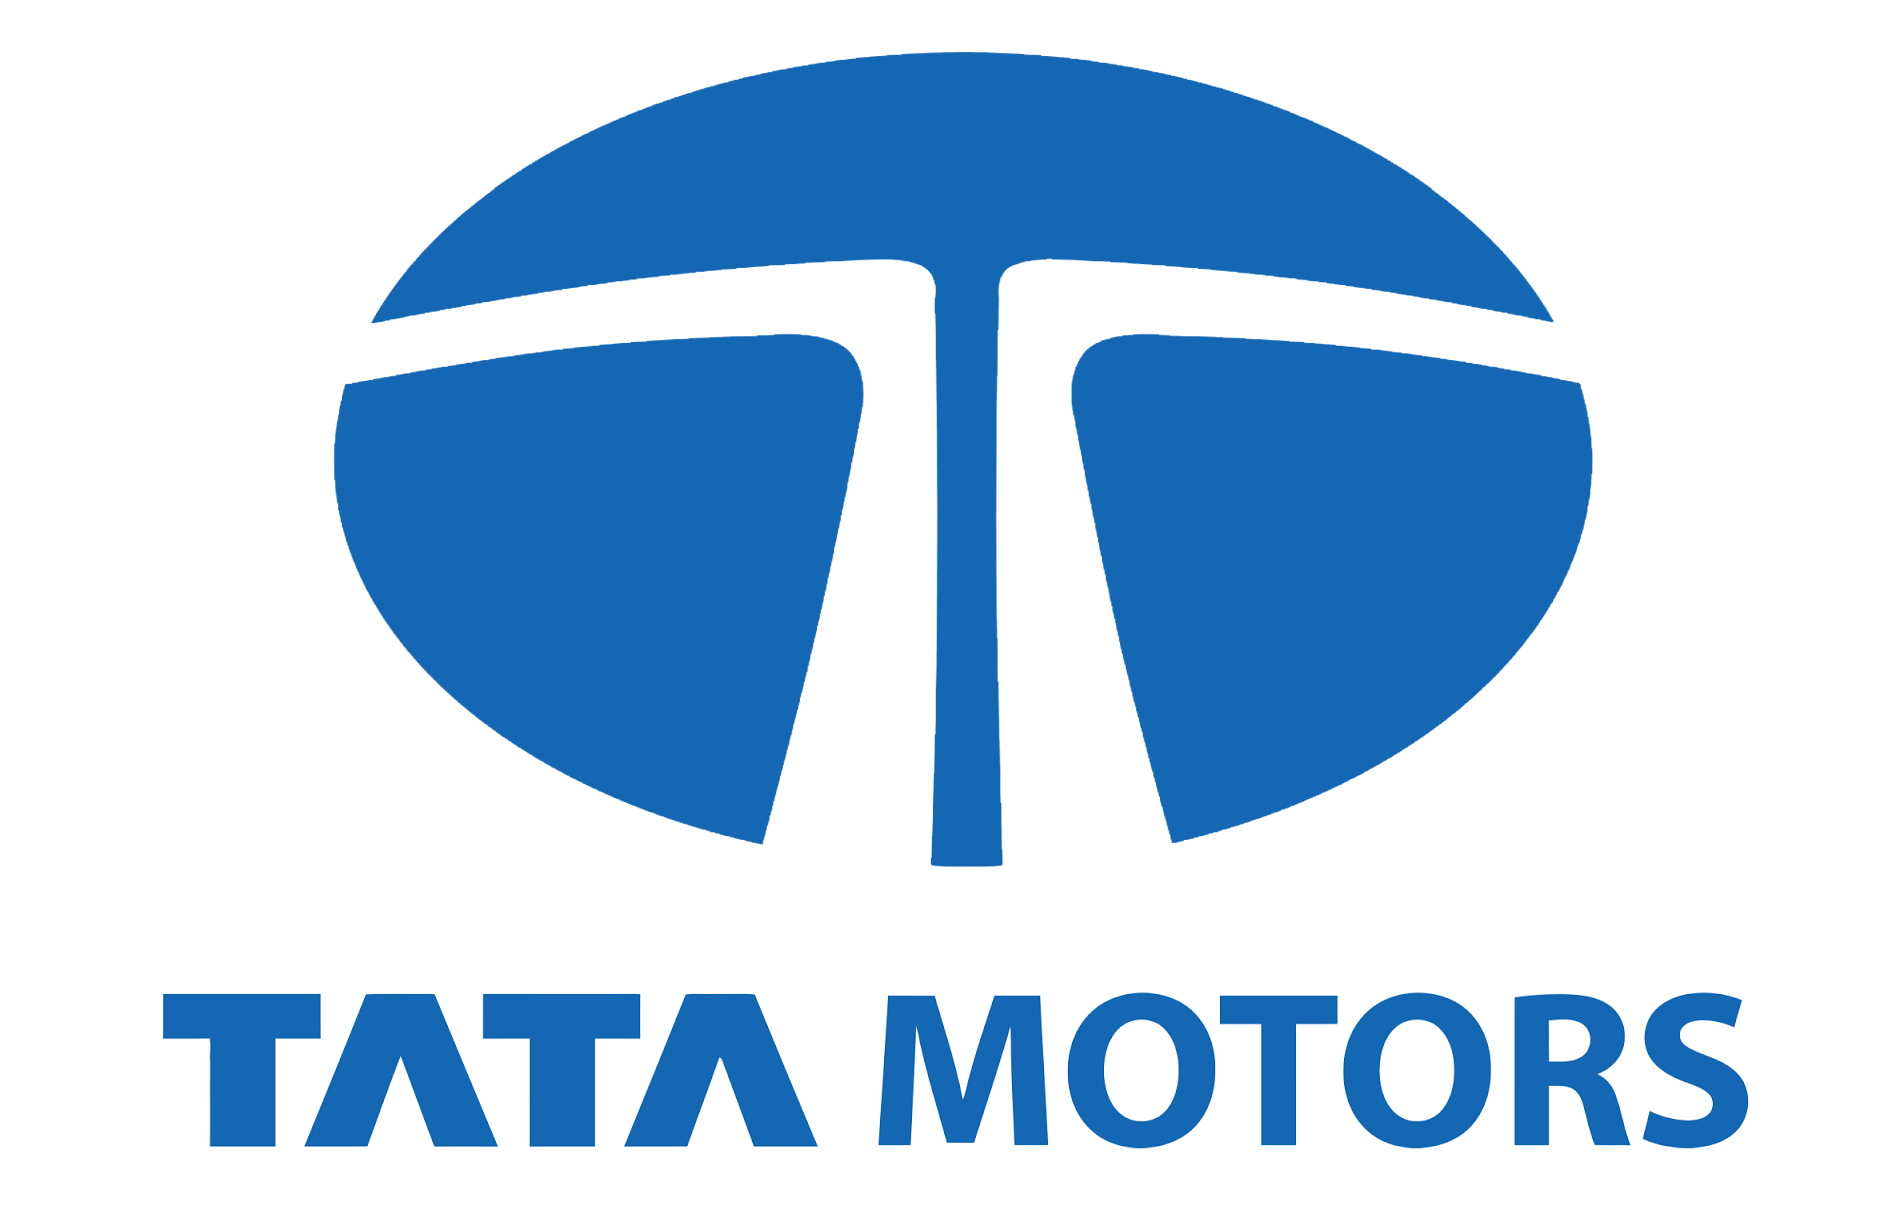 Tata Motors to sell 9.9% stake in Tata Tech for ₹1,613.7 crore - The Hindu  BusinessLine